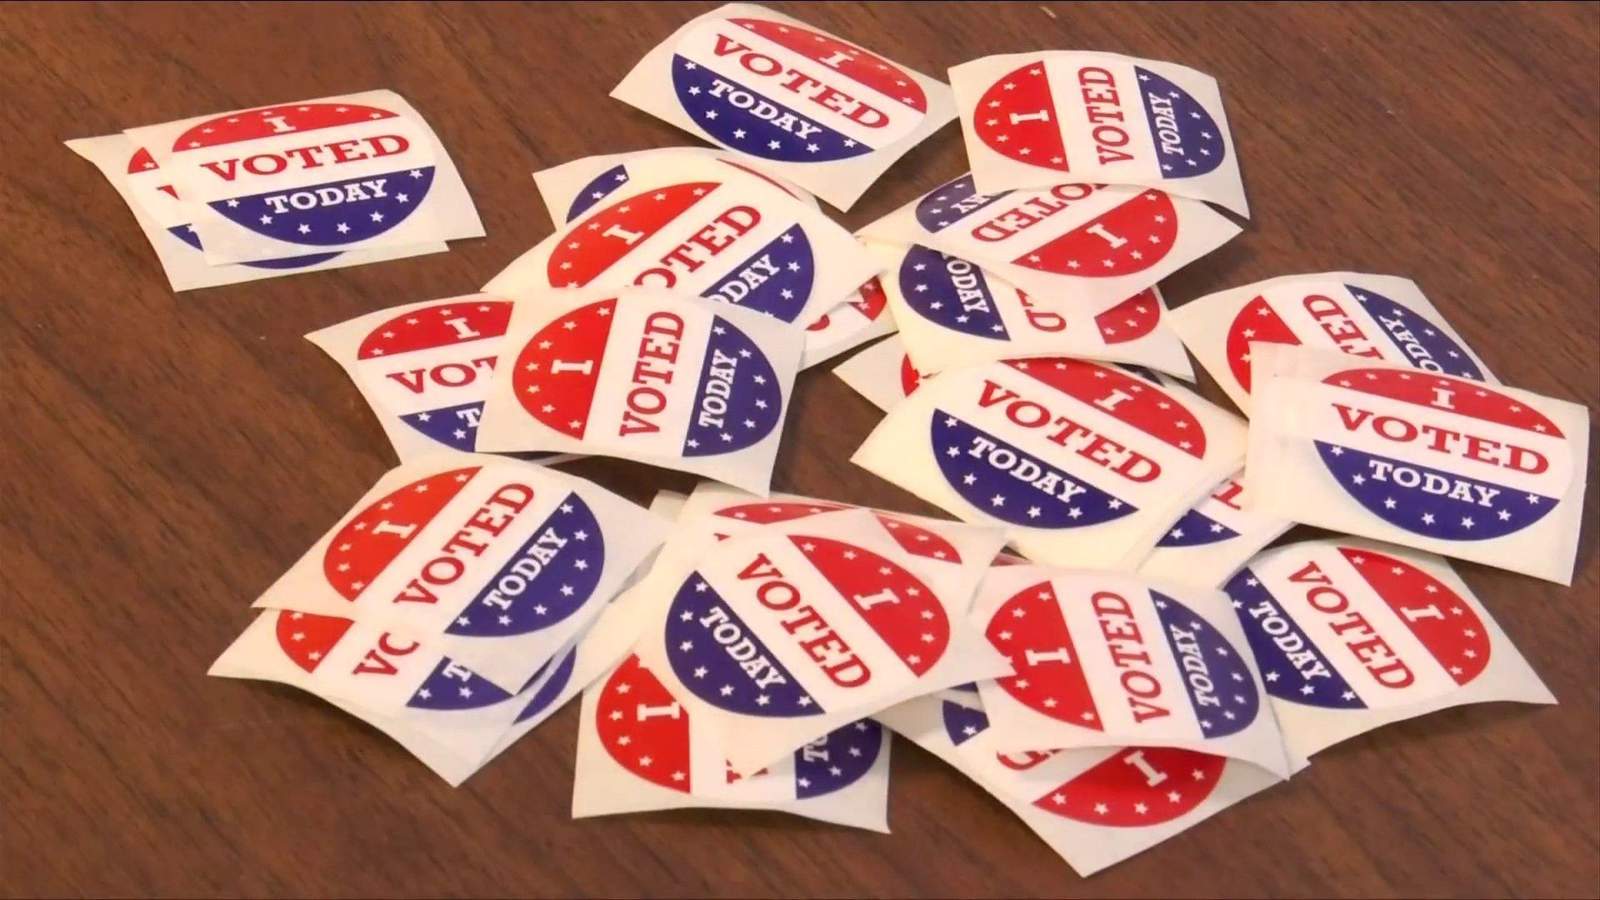 Covington leaders taking extra precautions on Election Day as virus spreads in Highlands